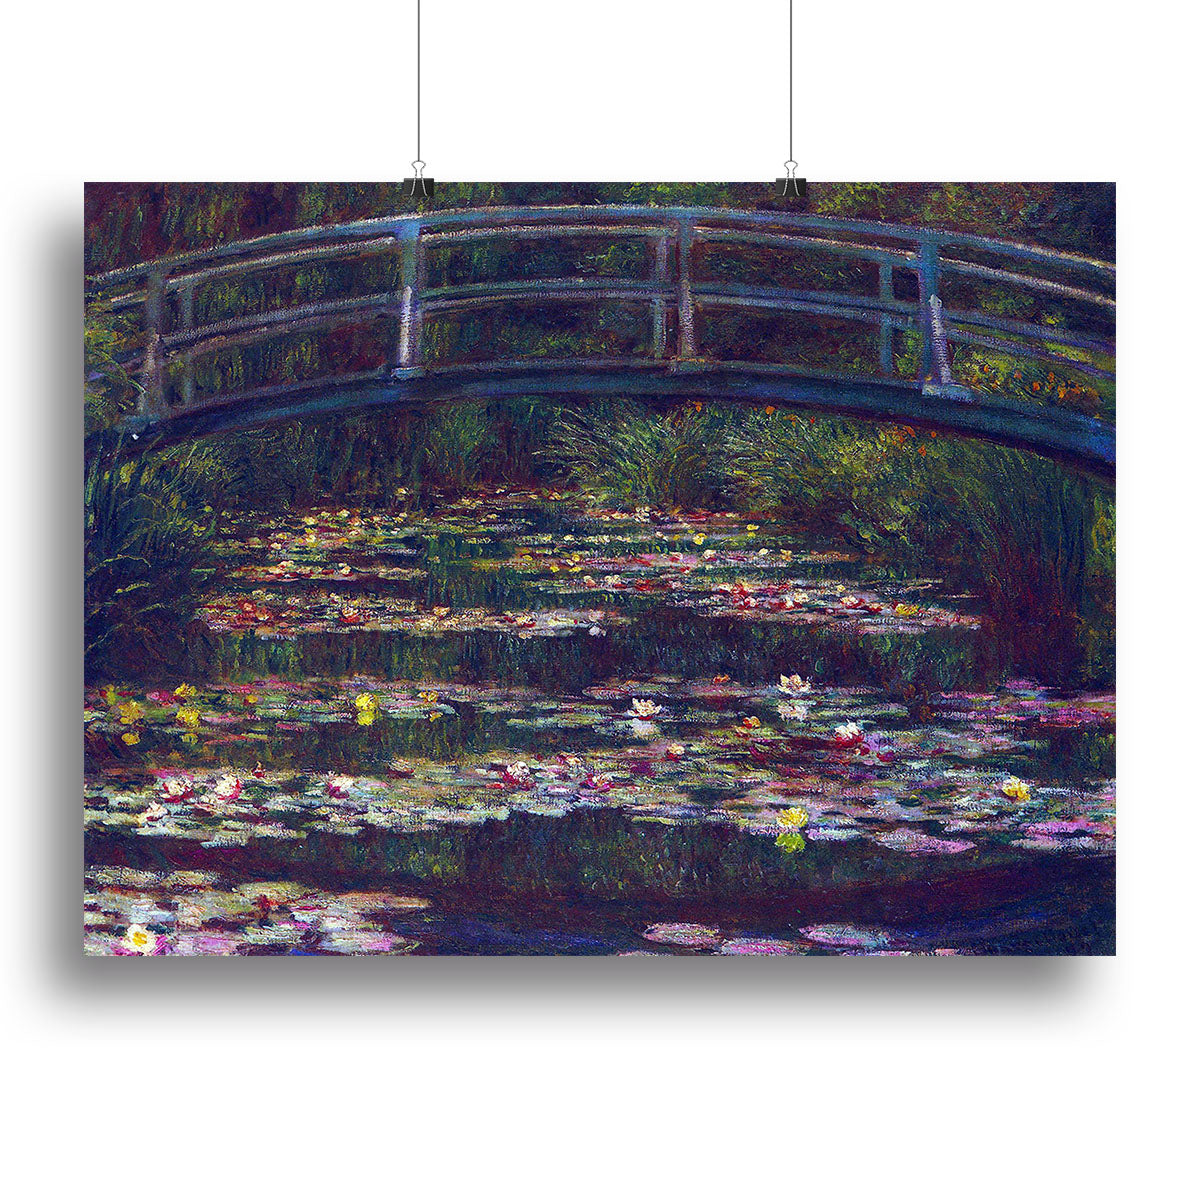 Water Lily Pond 5 by Monet Canvas Print or Poster - Canvas Art Rocks - 2